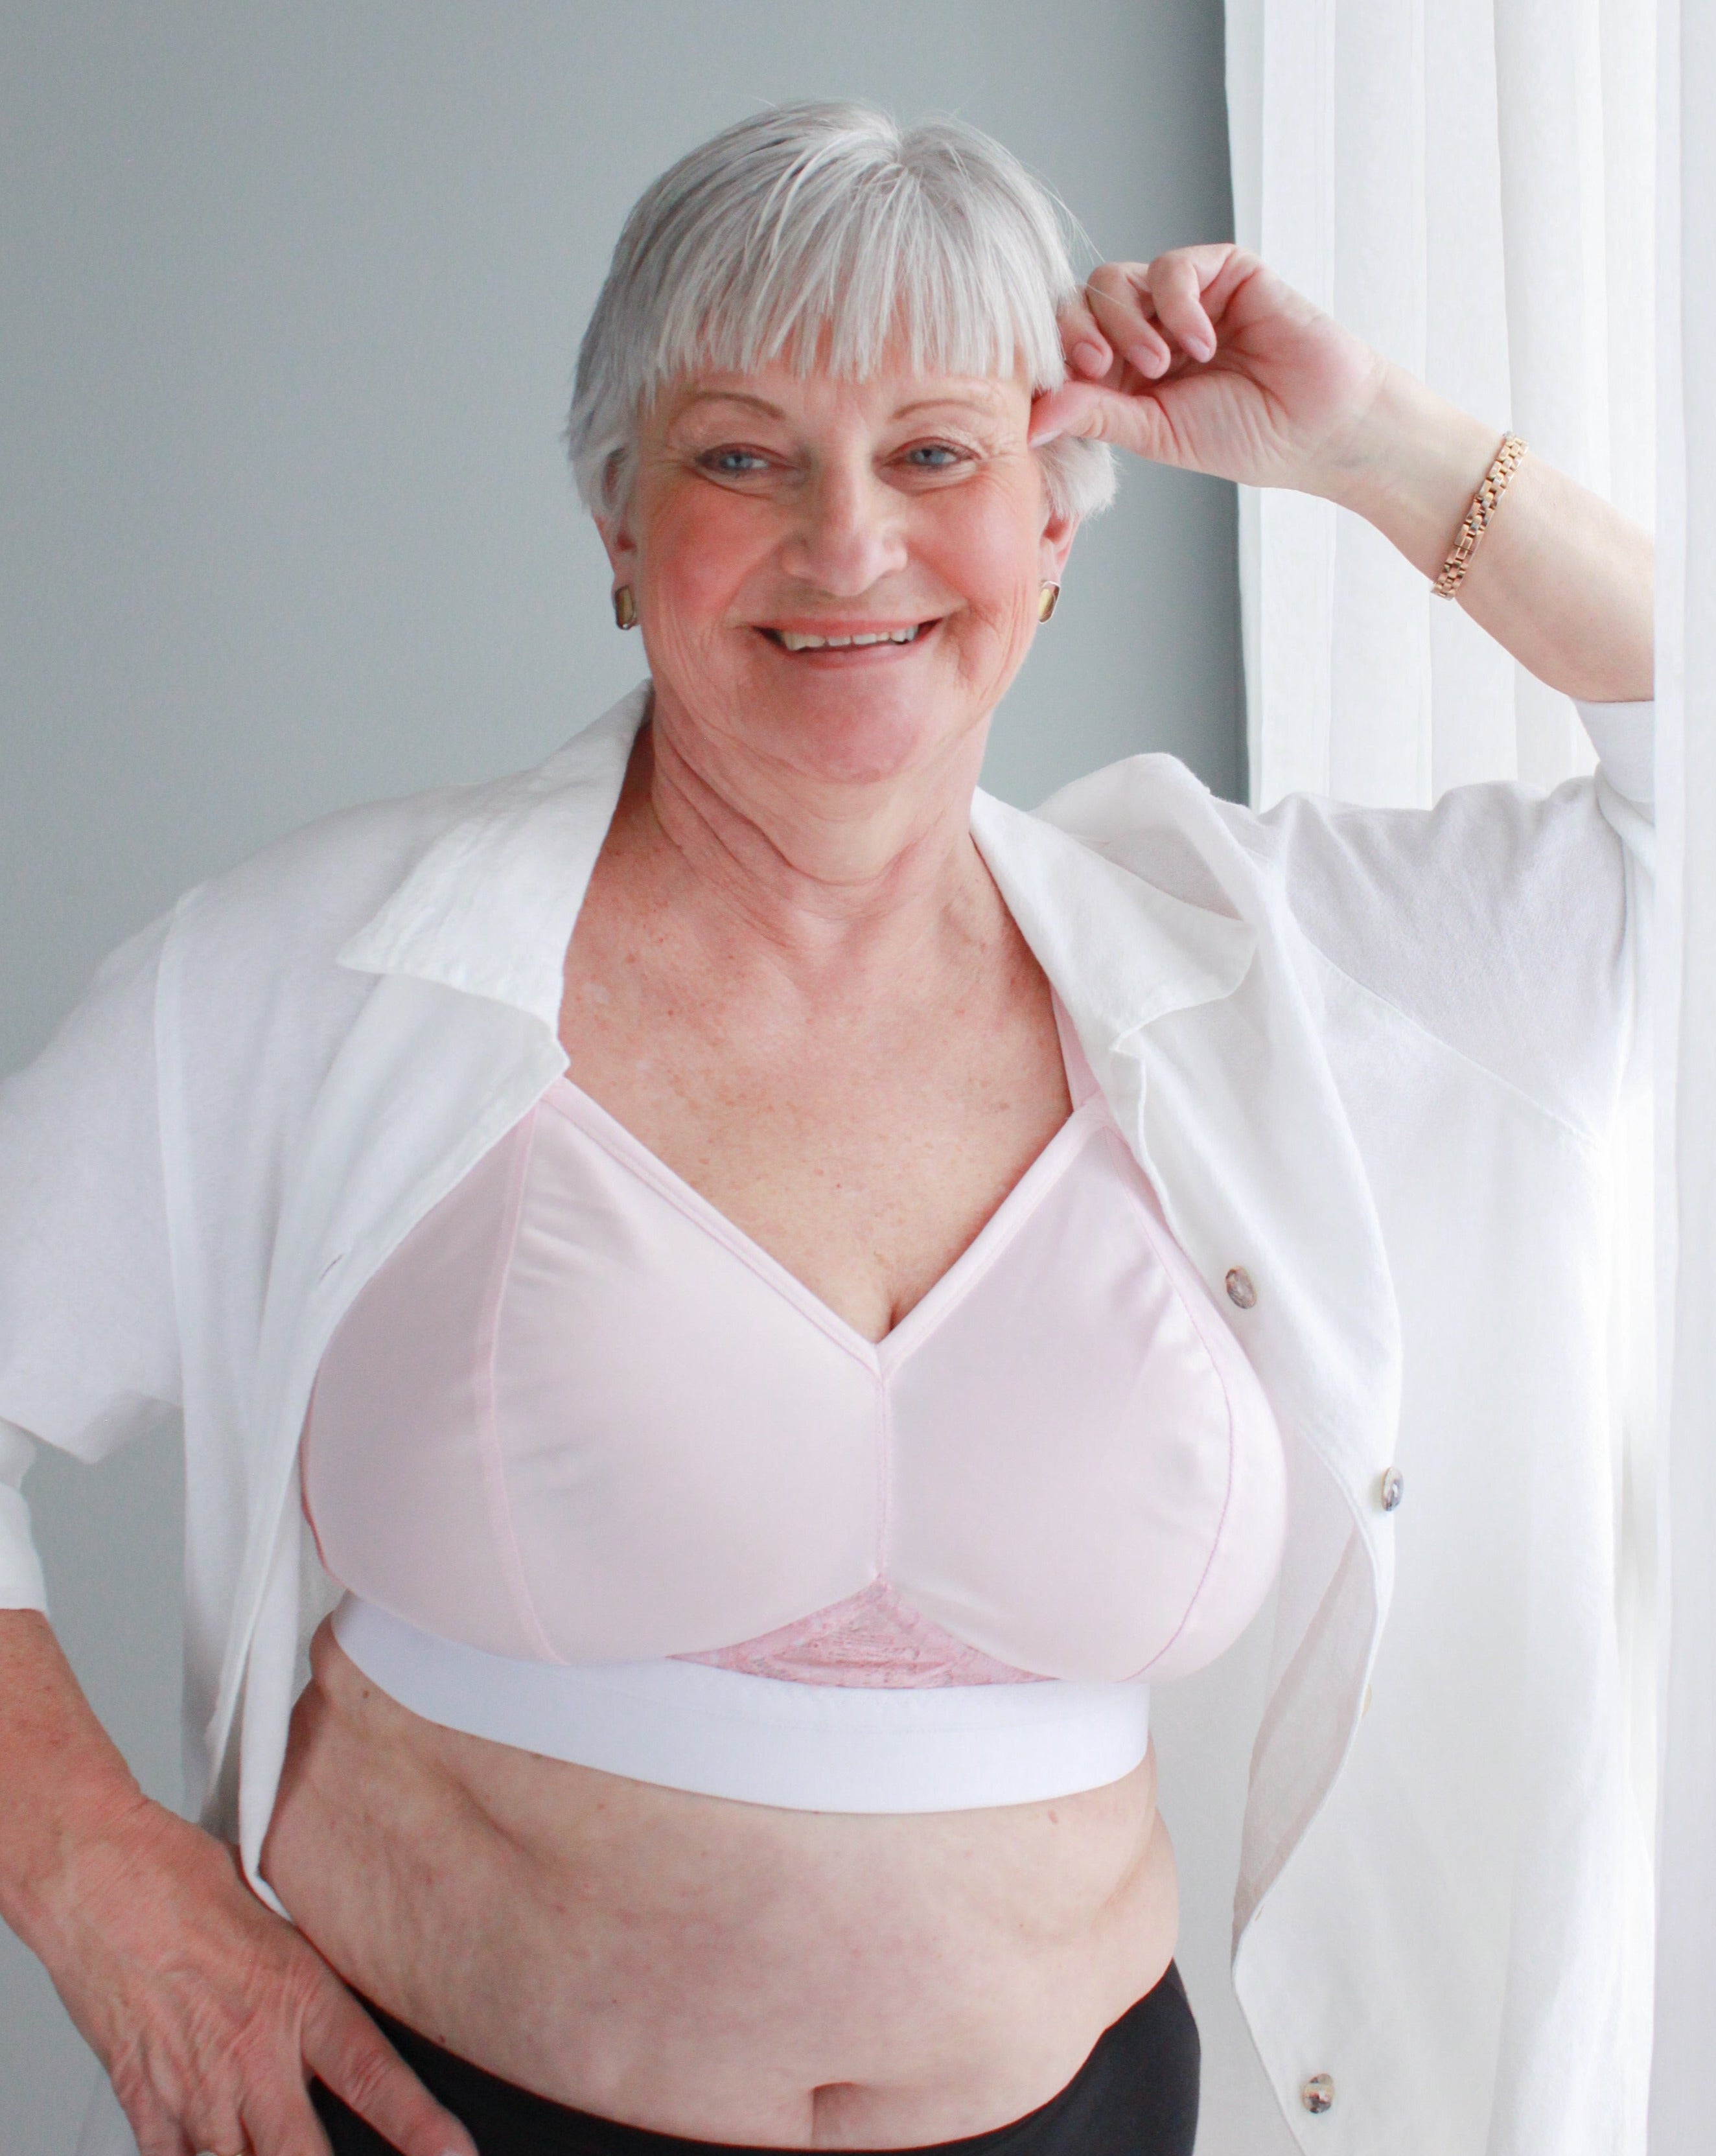 Rubies Custom Bras. Wirefree Bras for Seniors, Elders, Aging Breasts, Sagging Breasts, Mature Women, and those with sensitive skin. Our bras are custom made to your body, your size and your special needs. Perfect for those with disabilities, surgeries, breast cancer, mastectomy, lumpectomy, asymmetry, asymmetrical breasts, and implants. Handmade in Edmonton and Toronto Canada and the USA. 